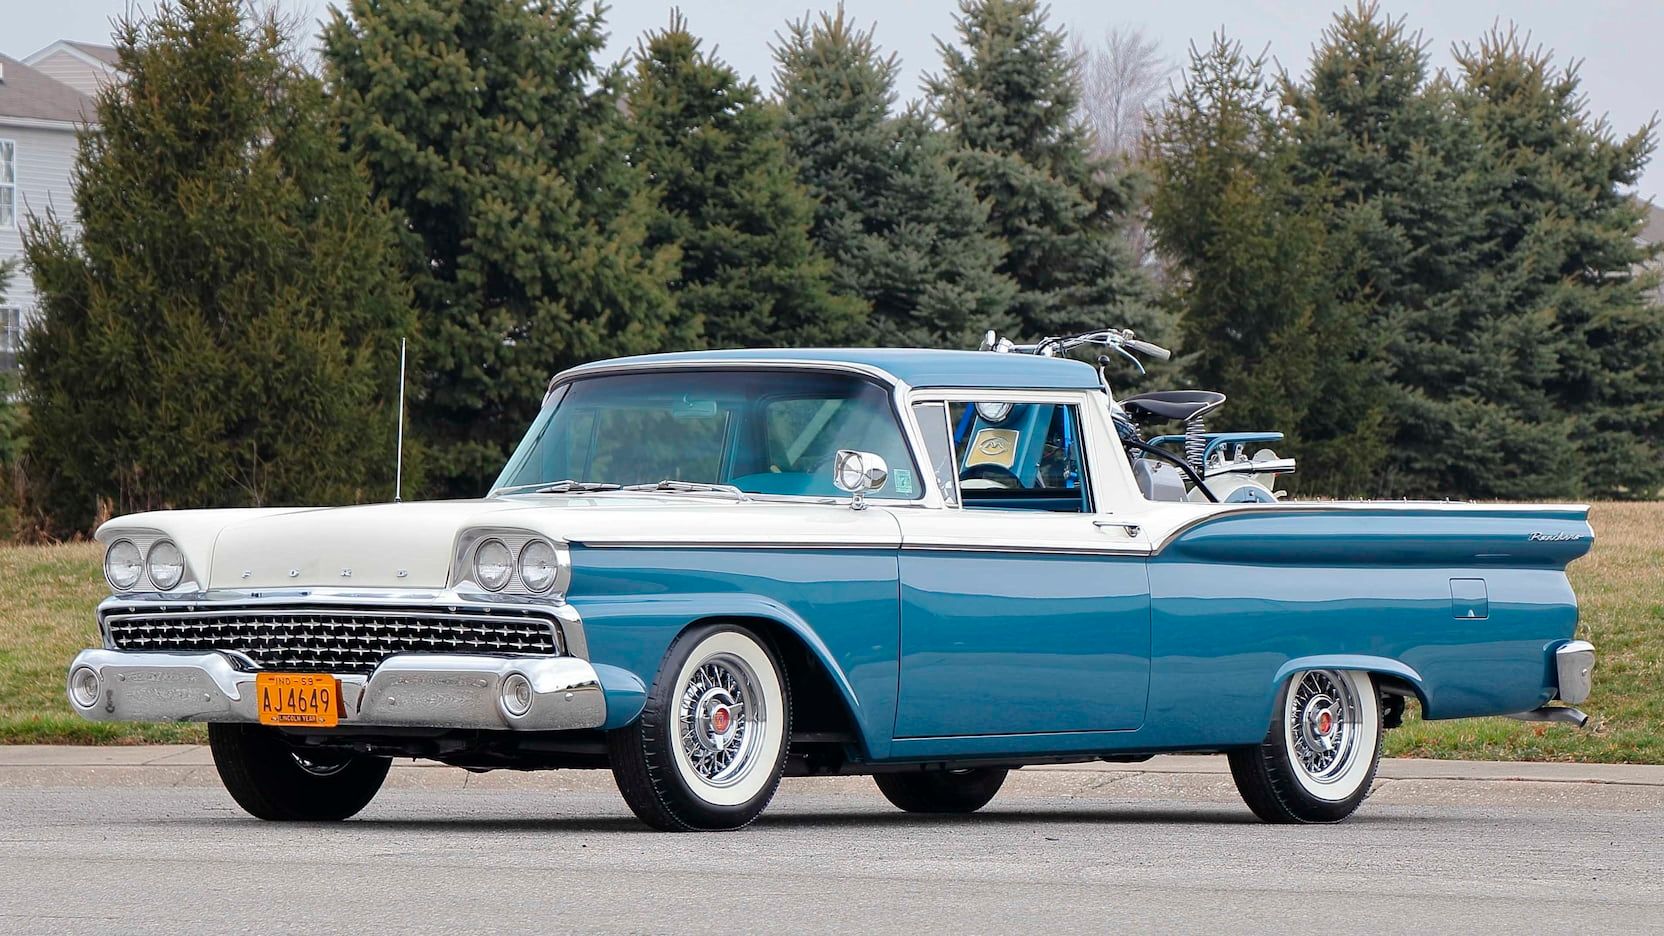 Blue and White 1958 Ford Ranchero carrying a Cushman Eagle bike parked on the tarmac